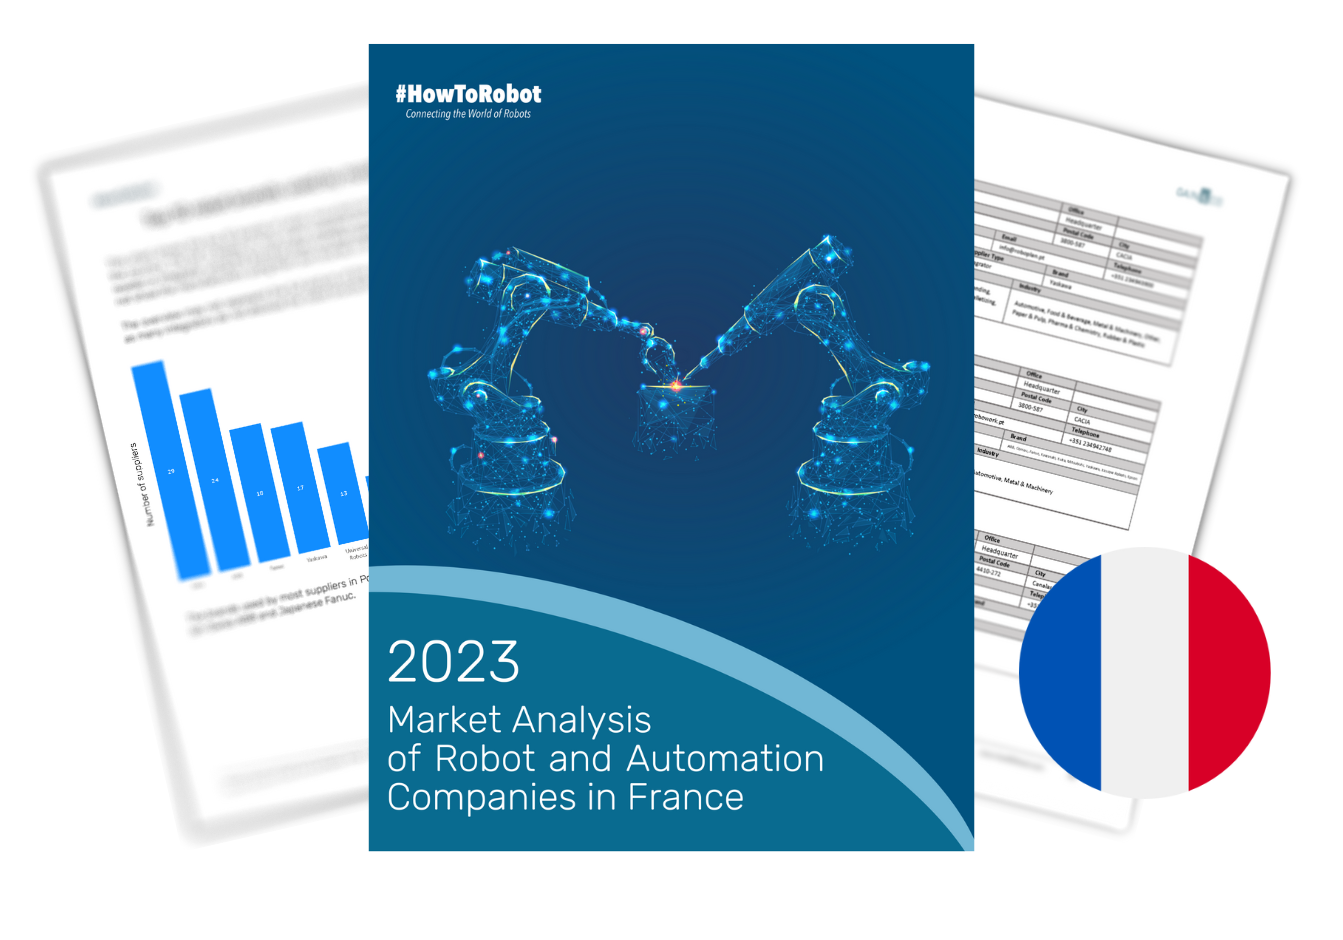 Market Report of Robot and Automation Companies in France